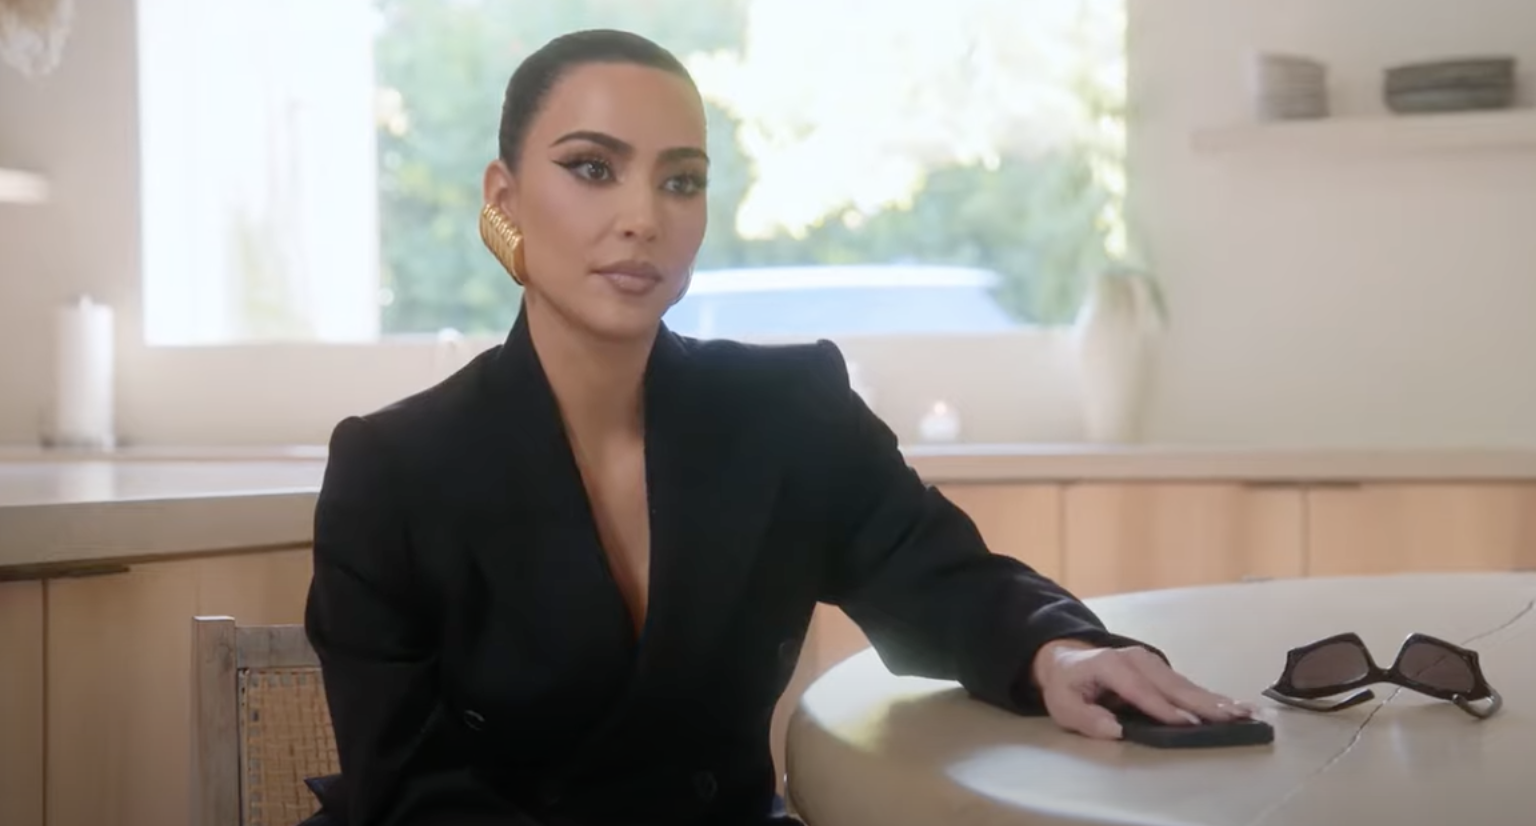 Kim sitting at a kitchen table with her hand resting on it